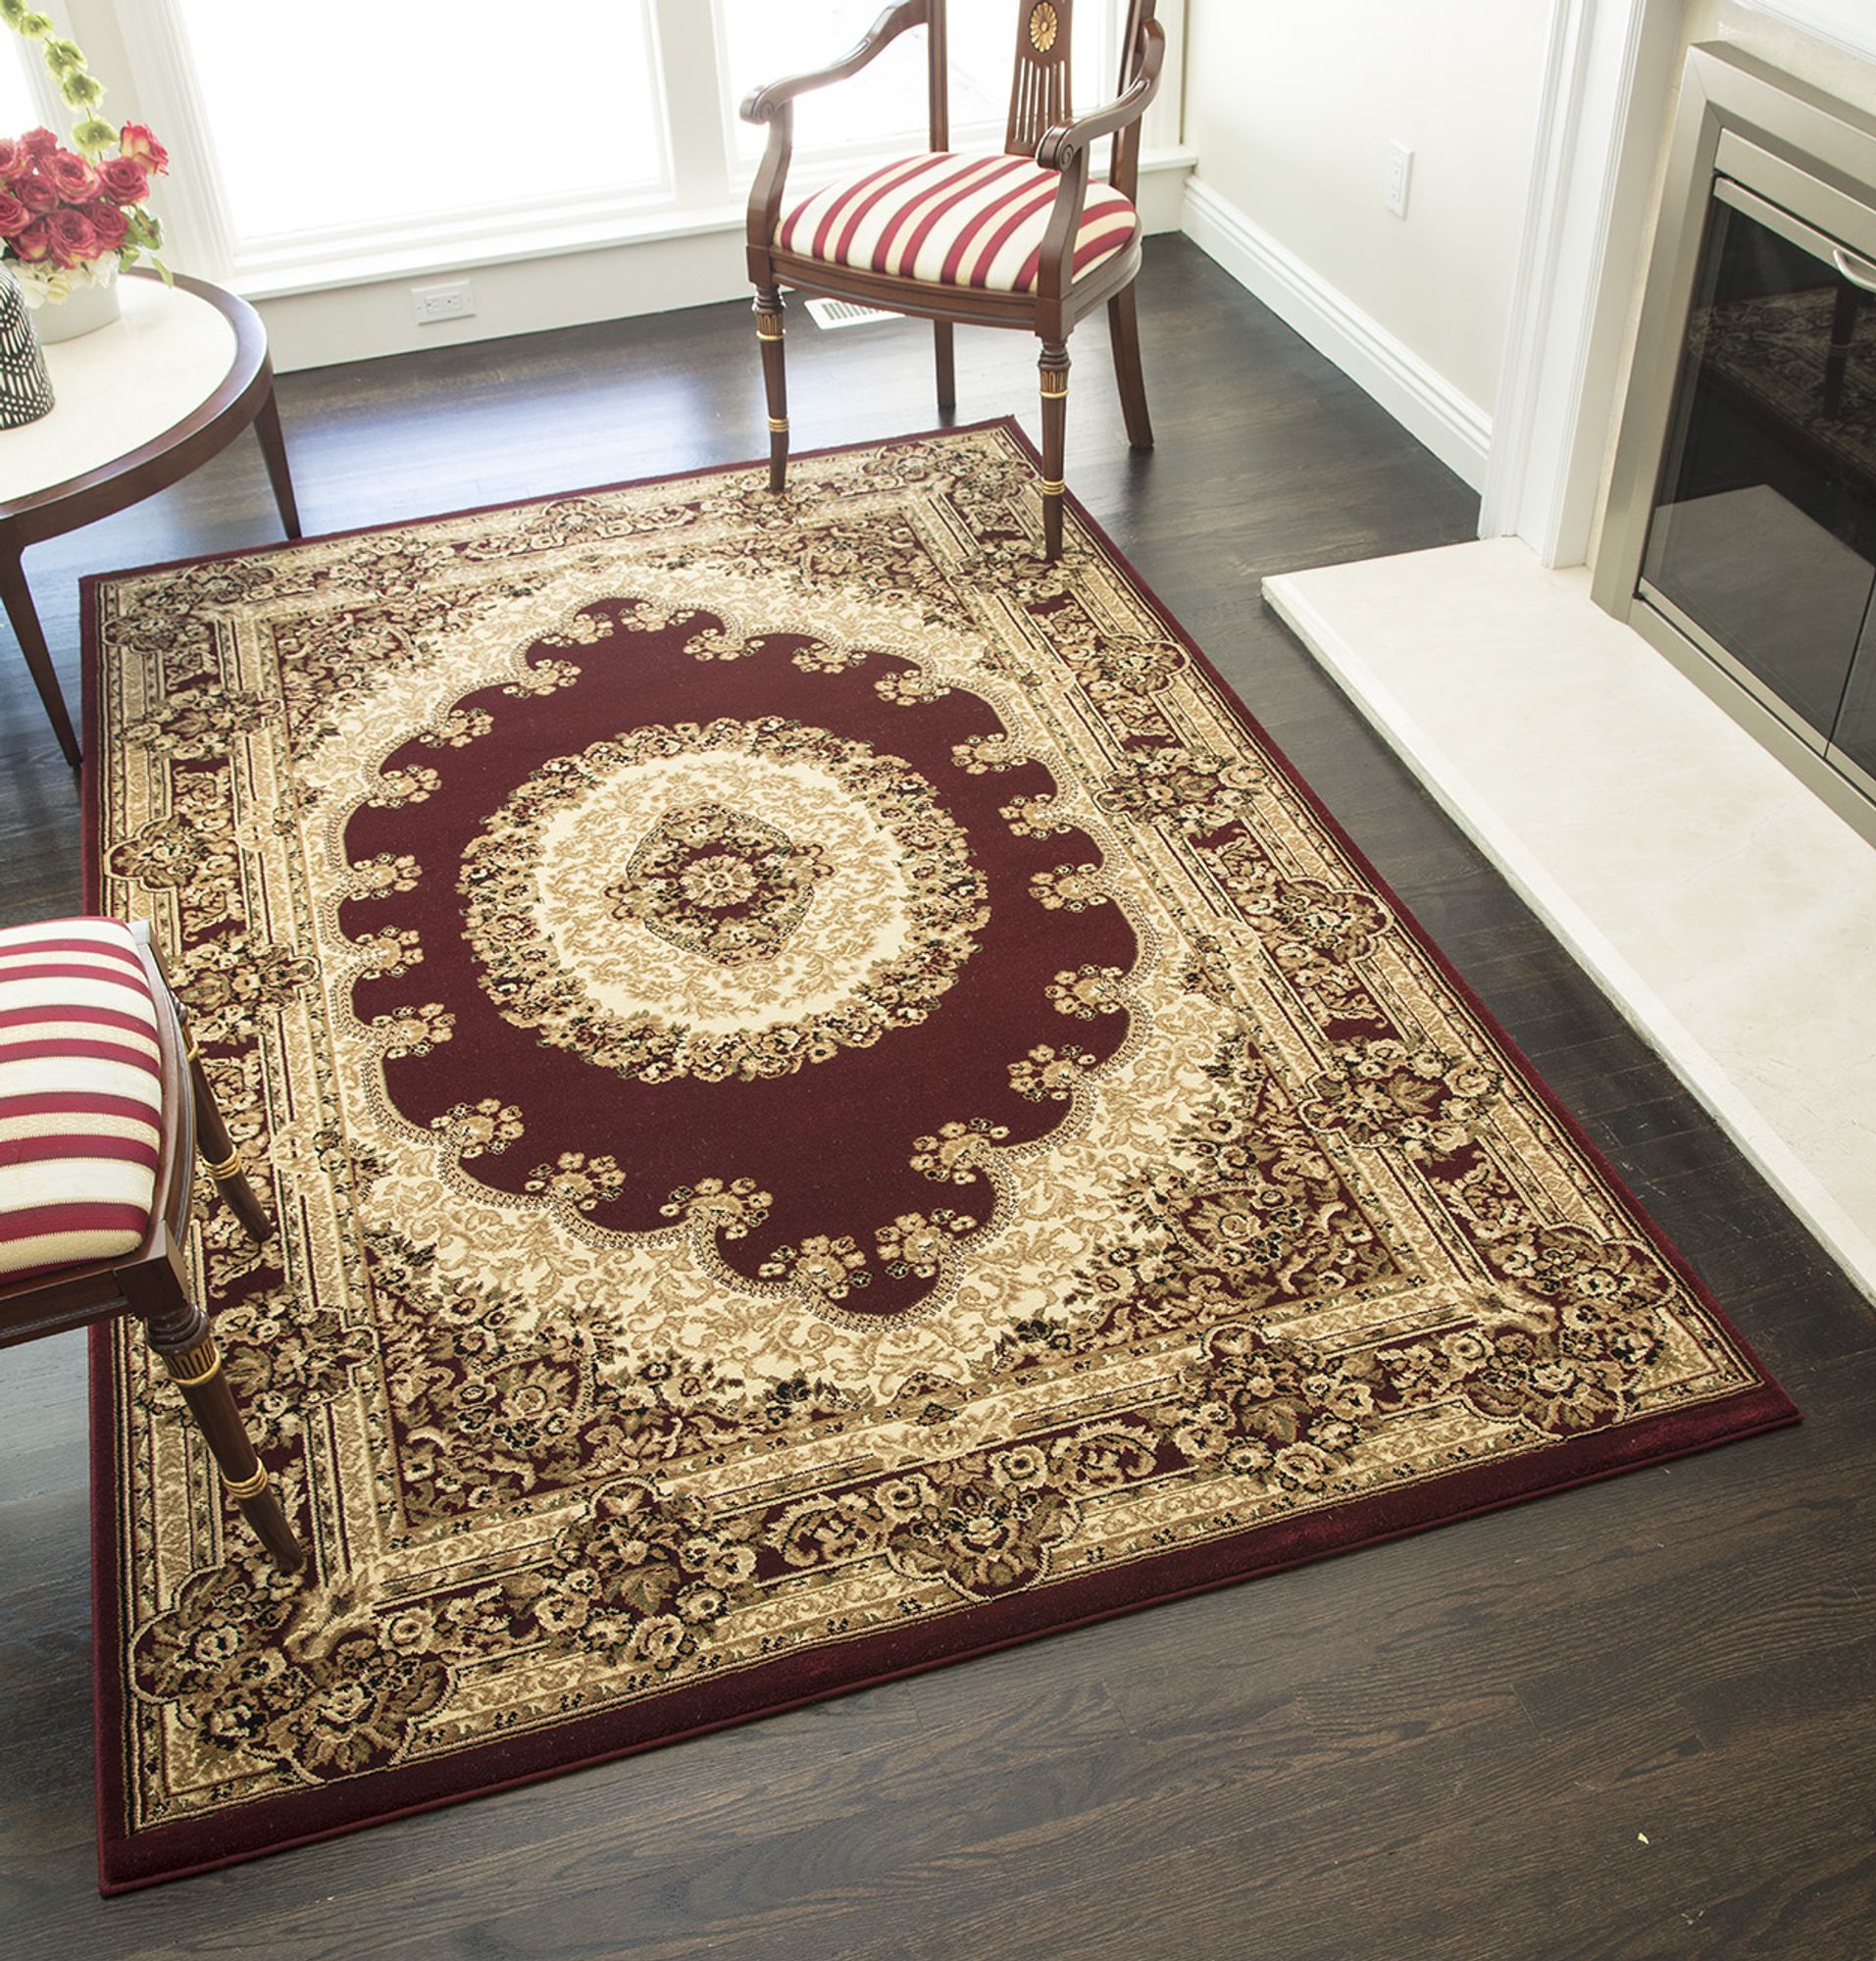 Rugs America Vista 807-RED Kerman Red Oriental Traditional Red Area Rug, 7'10"x10'10" - image 1 of 5